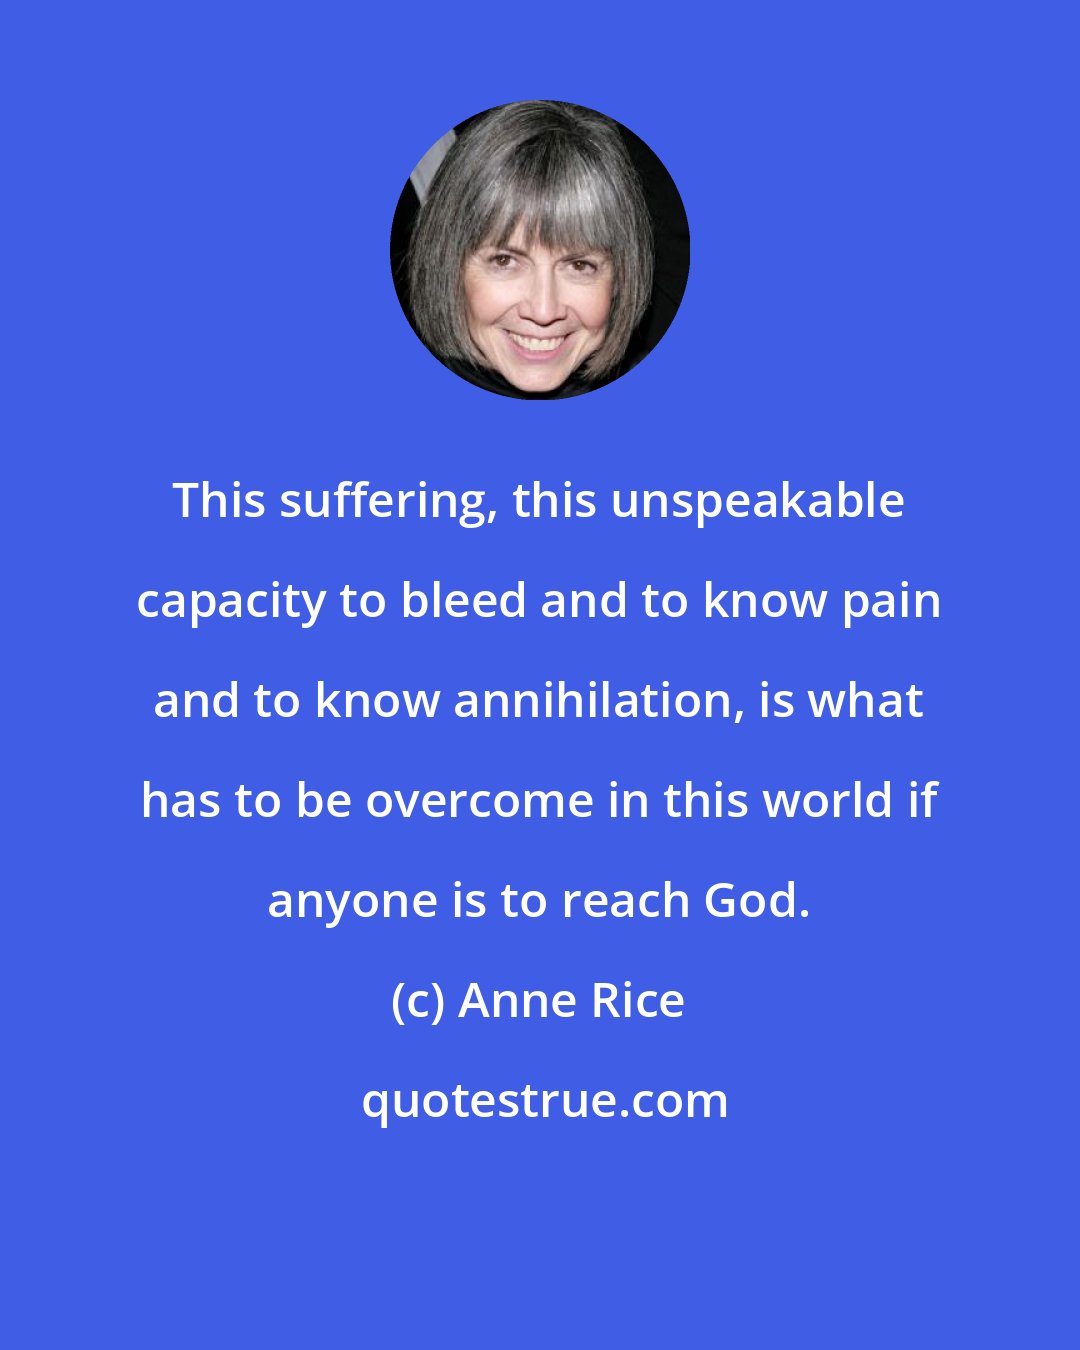 Anne Rice: This suffering, this unspeakable capacity to bleed and to know pain and to know annihilation, is what has to be overcome in this world if anyone is to reach God.